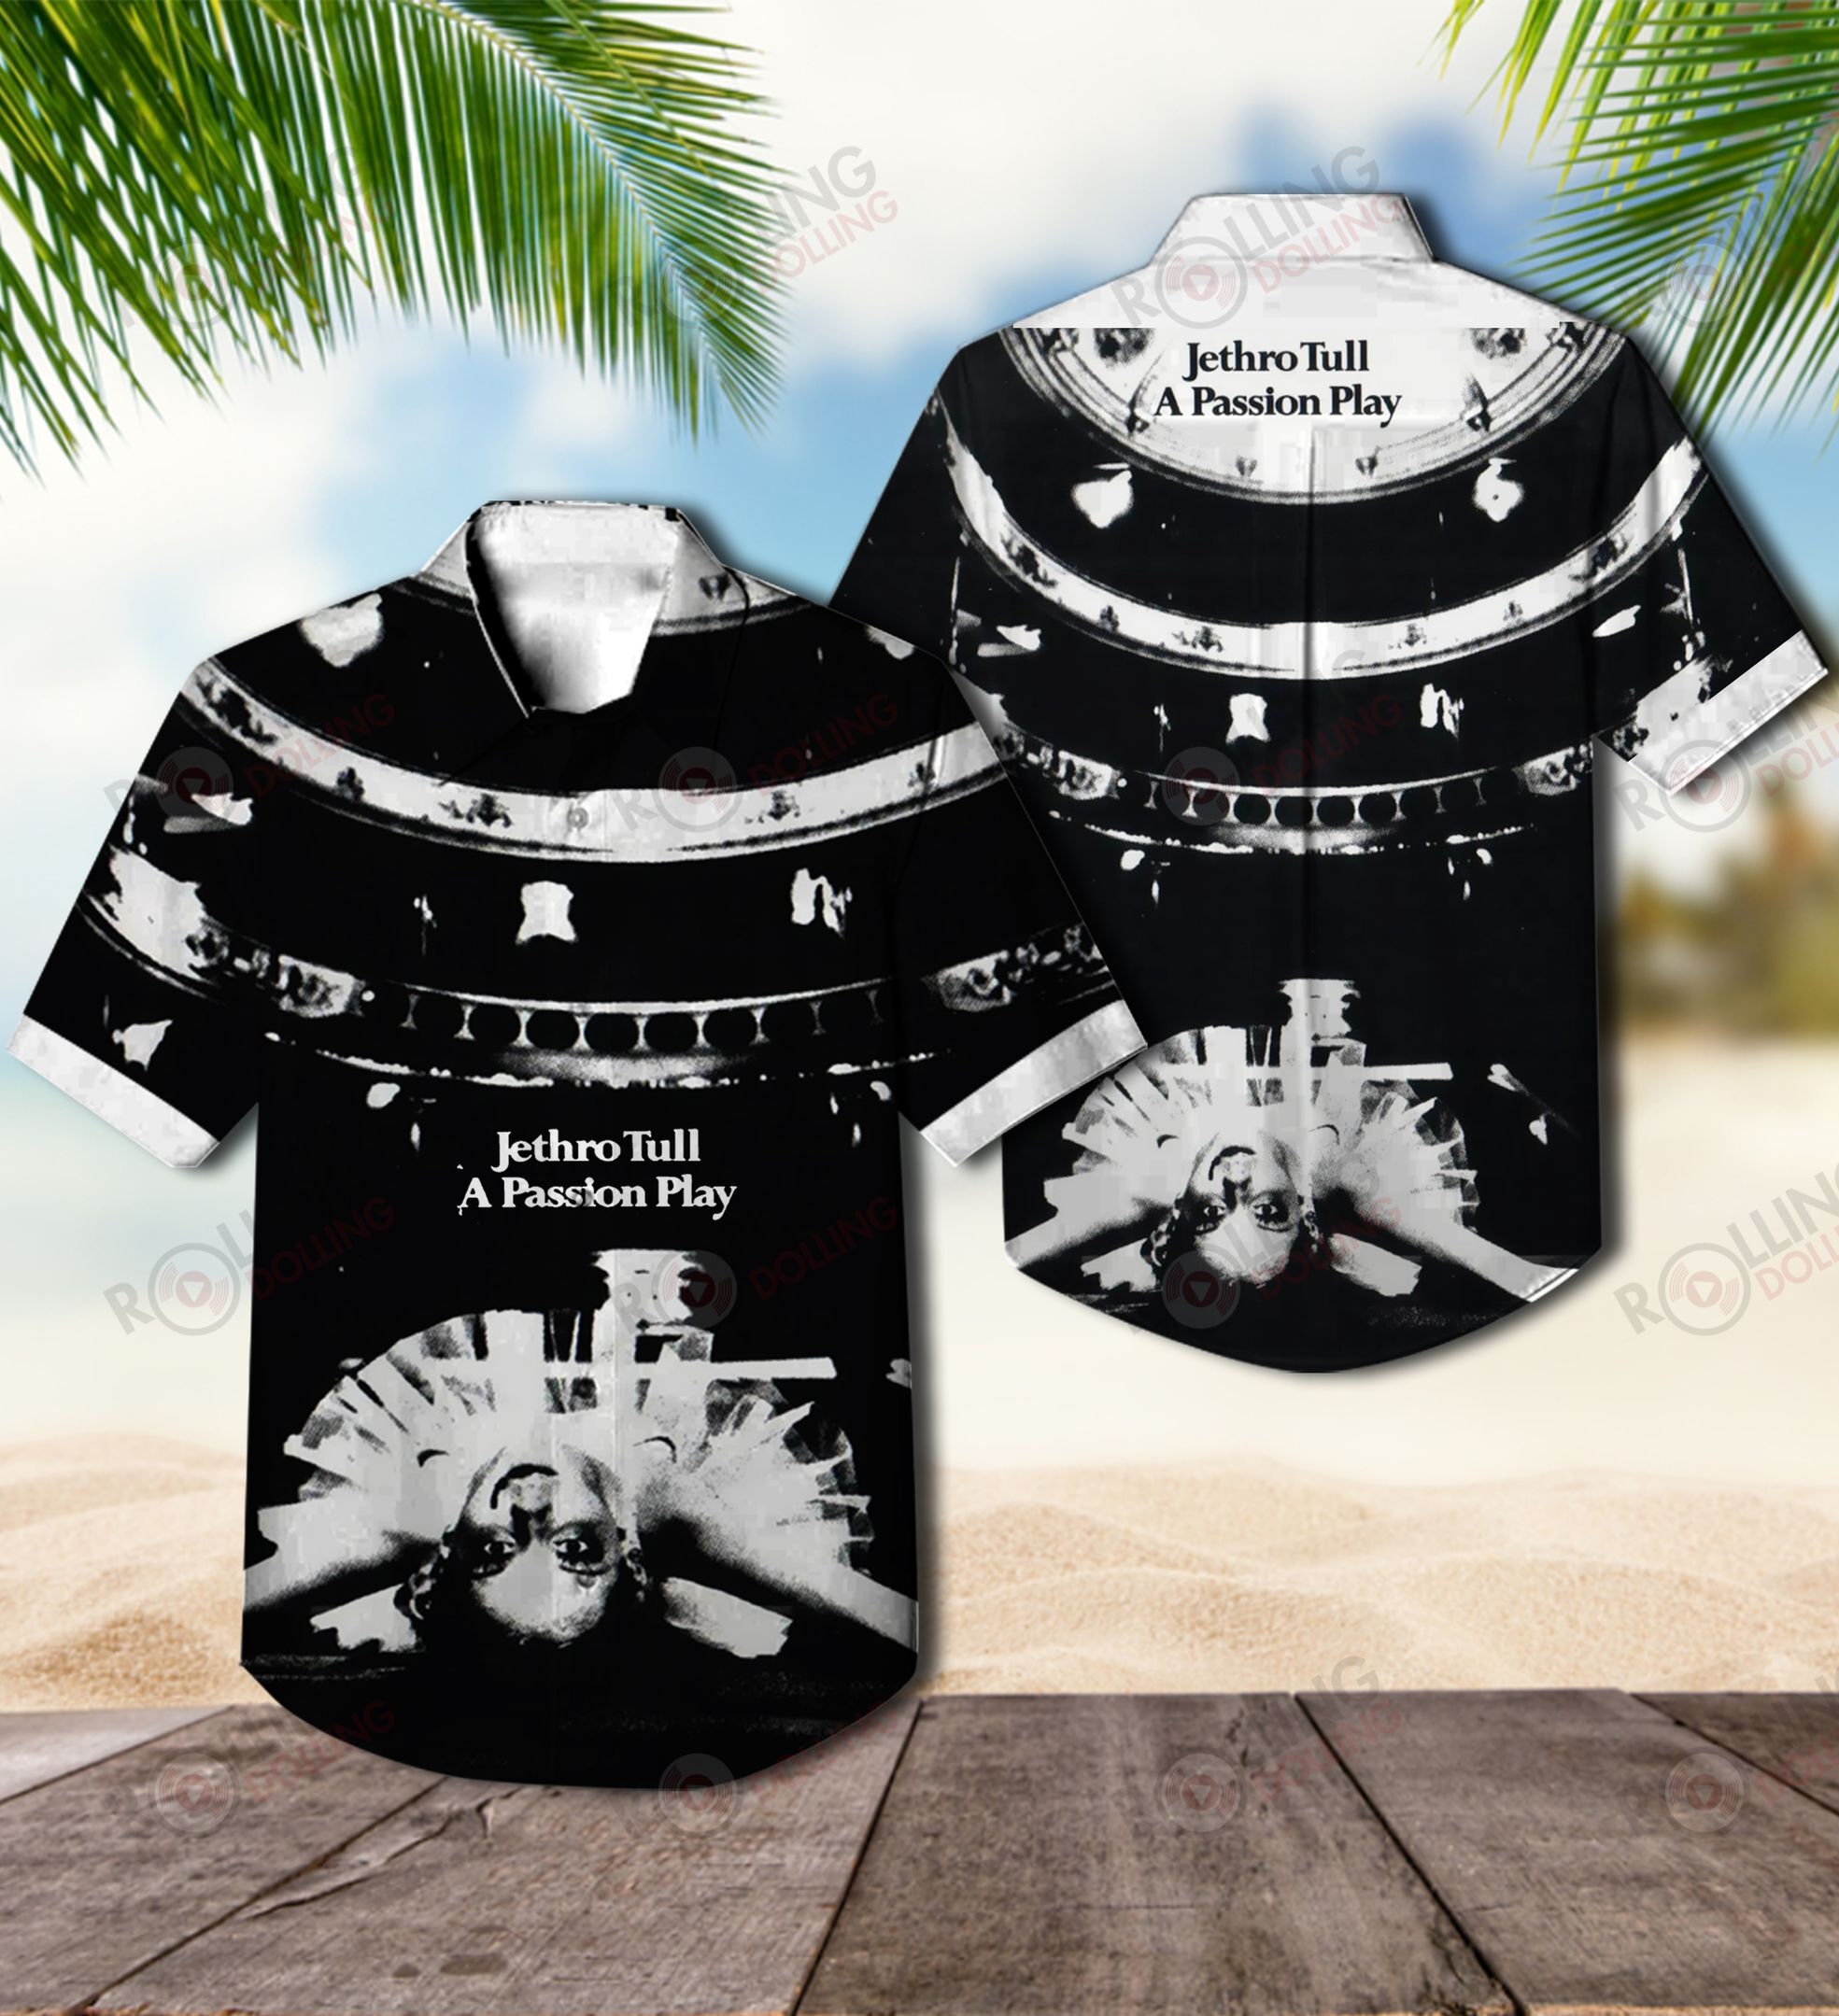 We have compiled a list of some of the best Hawaiian shirt that are available 131